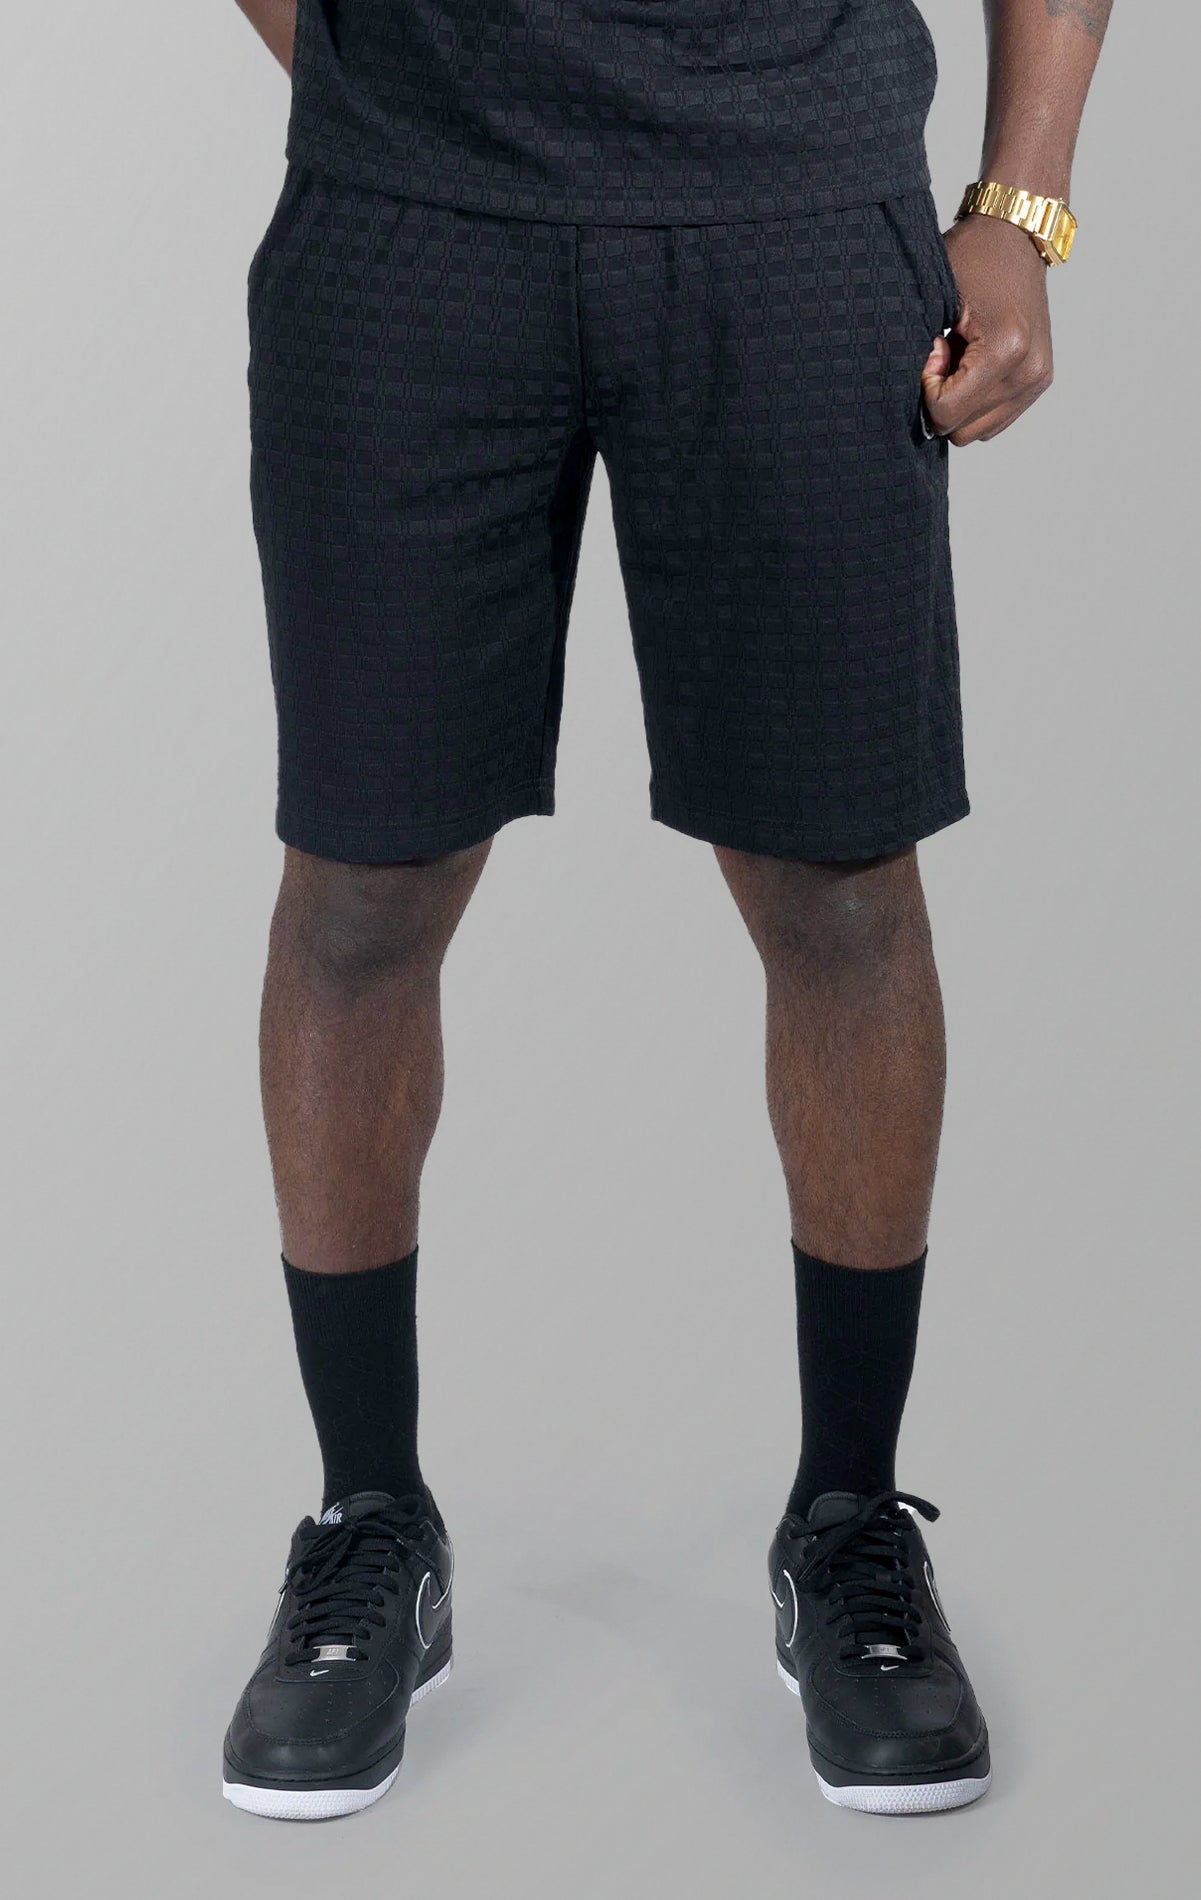 Modena Knit Shorts in black.  Made from a high-quality blend of 95% cotton and 5% spandex for a soft and comfortable feel. Features a unique colored blocking design and a pre-shrunk true-to-size fit.